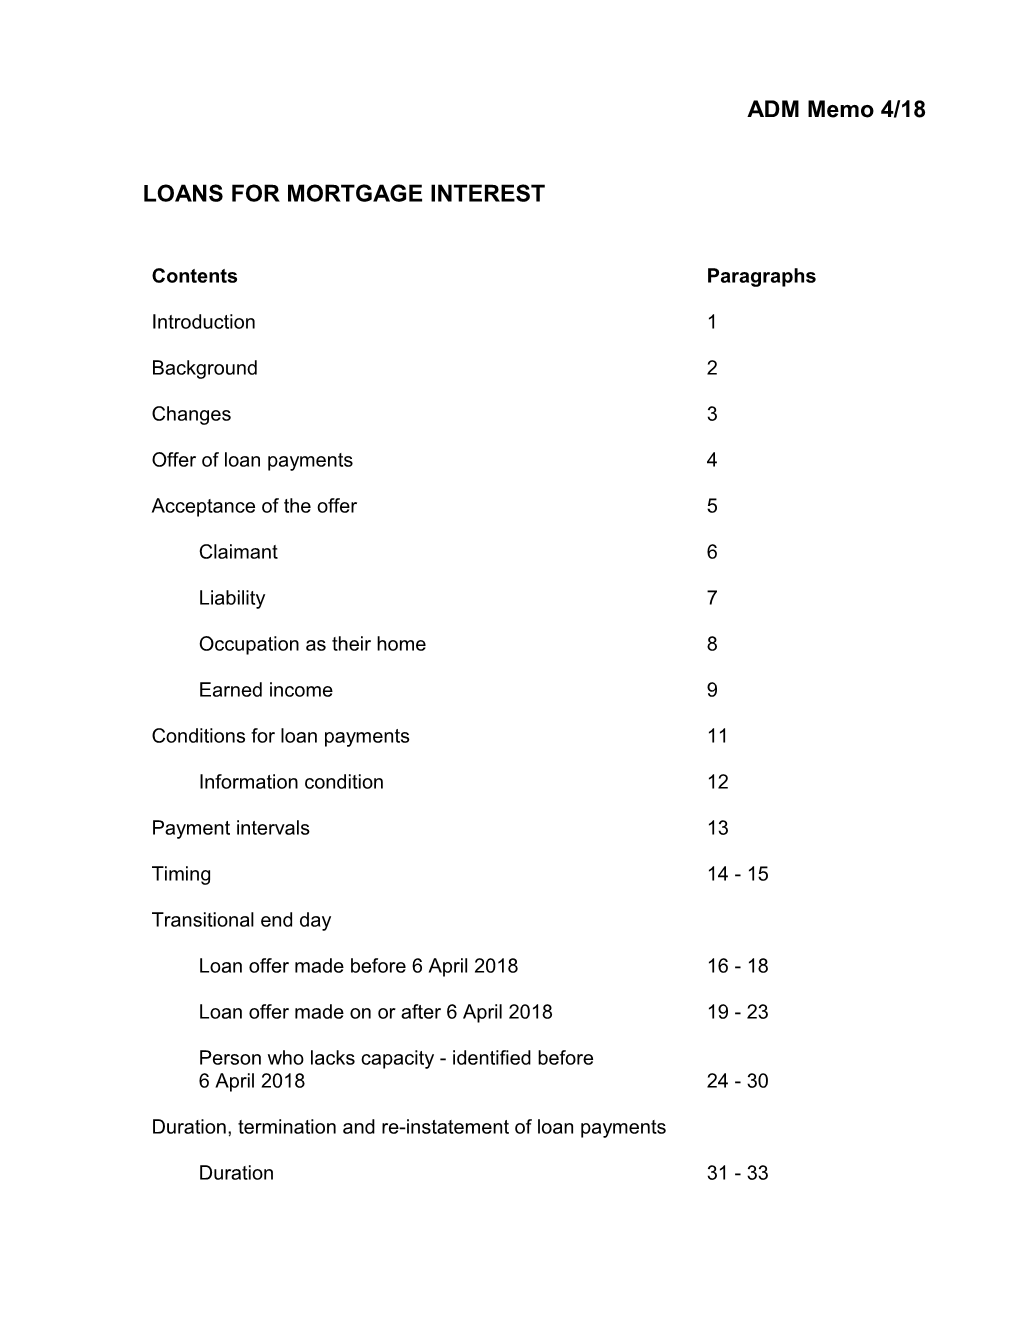 Loans for Mortgage Interest